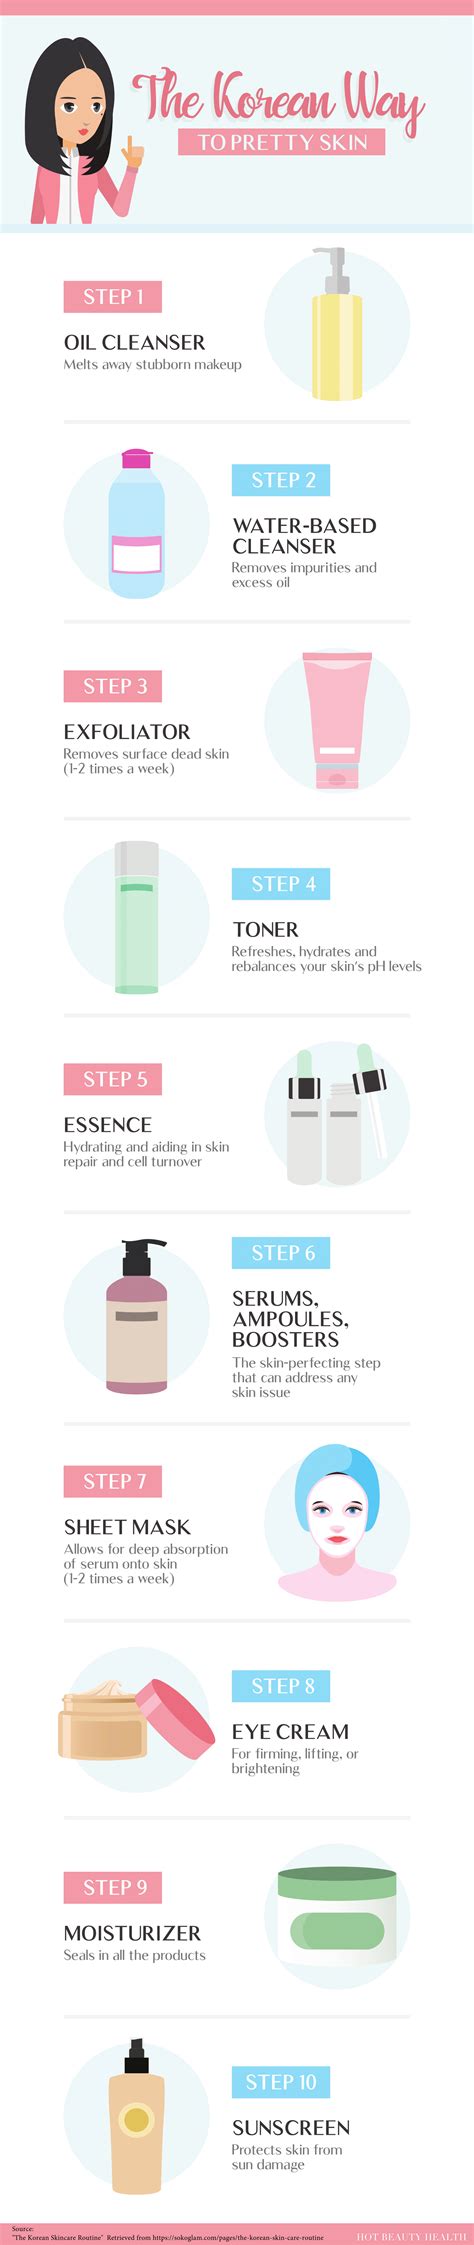 The 10 Step Korean Skincare Routine Infographic Hot Beauty Health